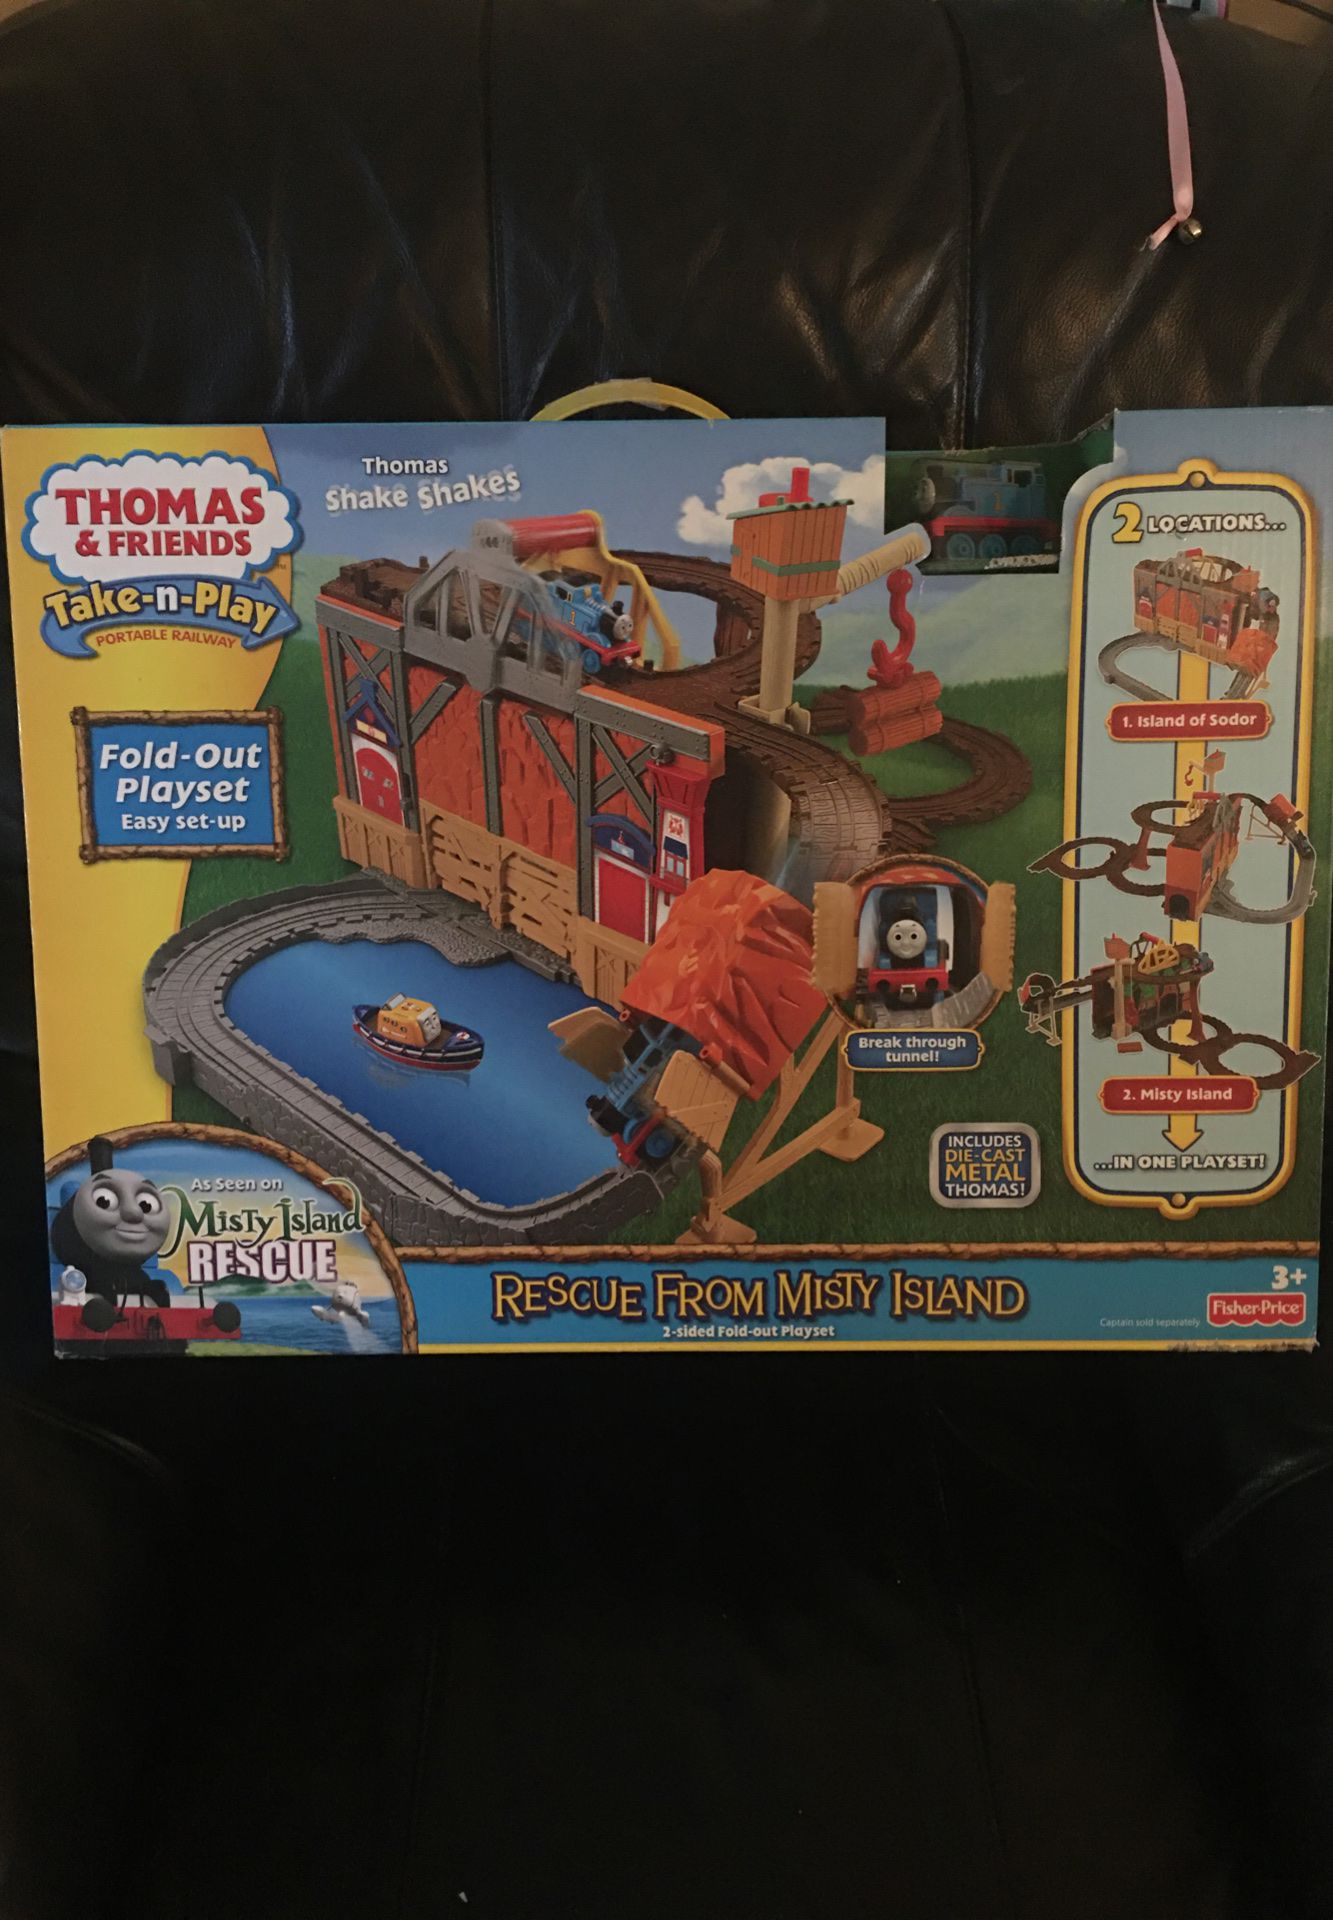 Thomas & Friends: Rescue From Misty Island